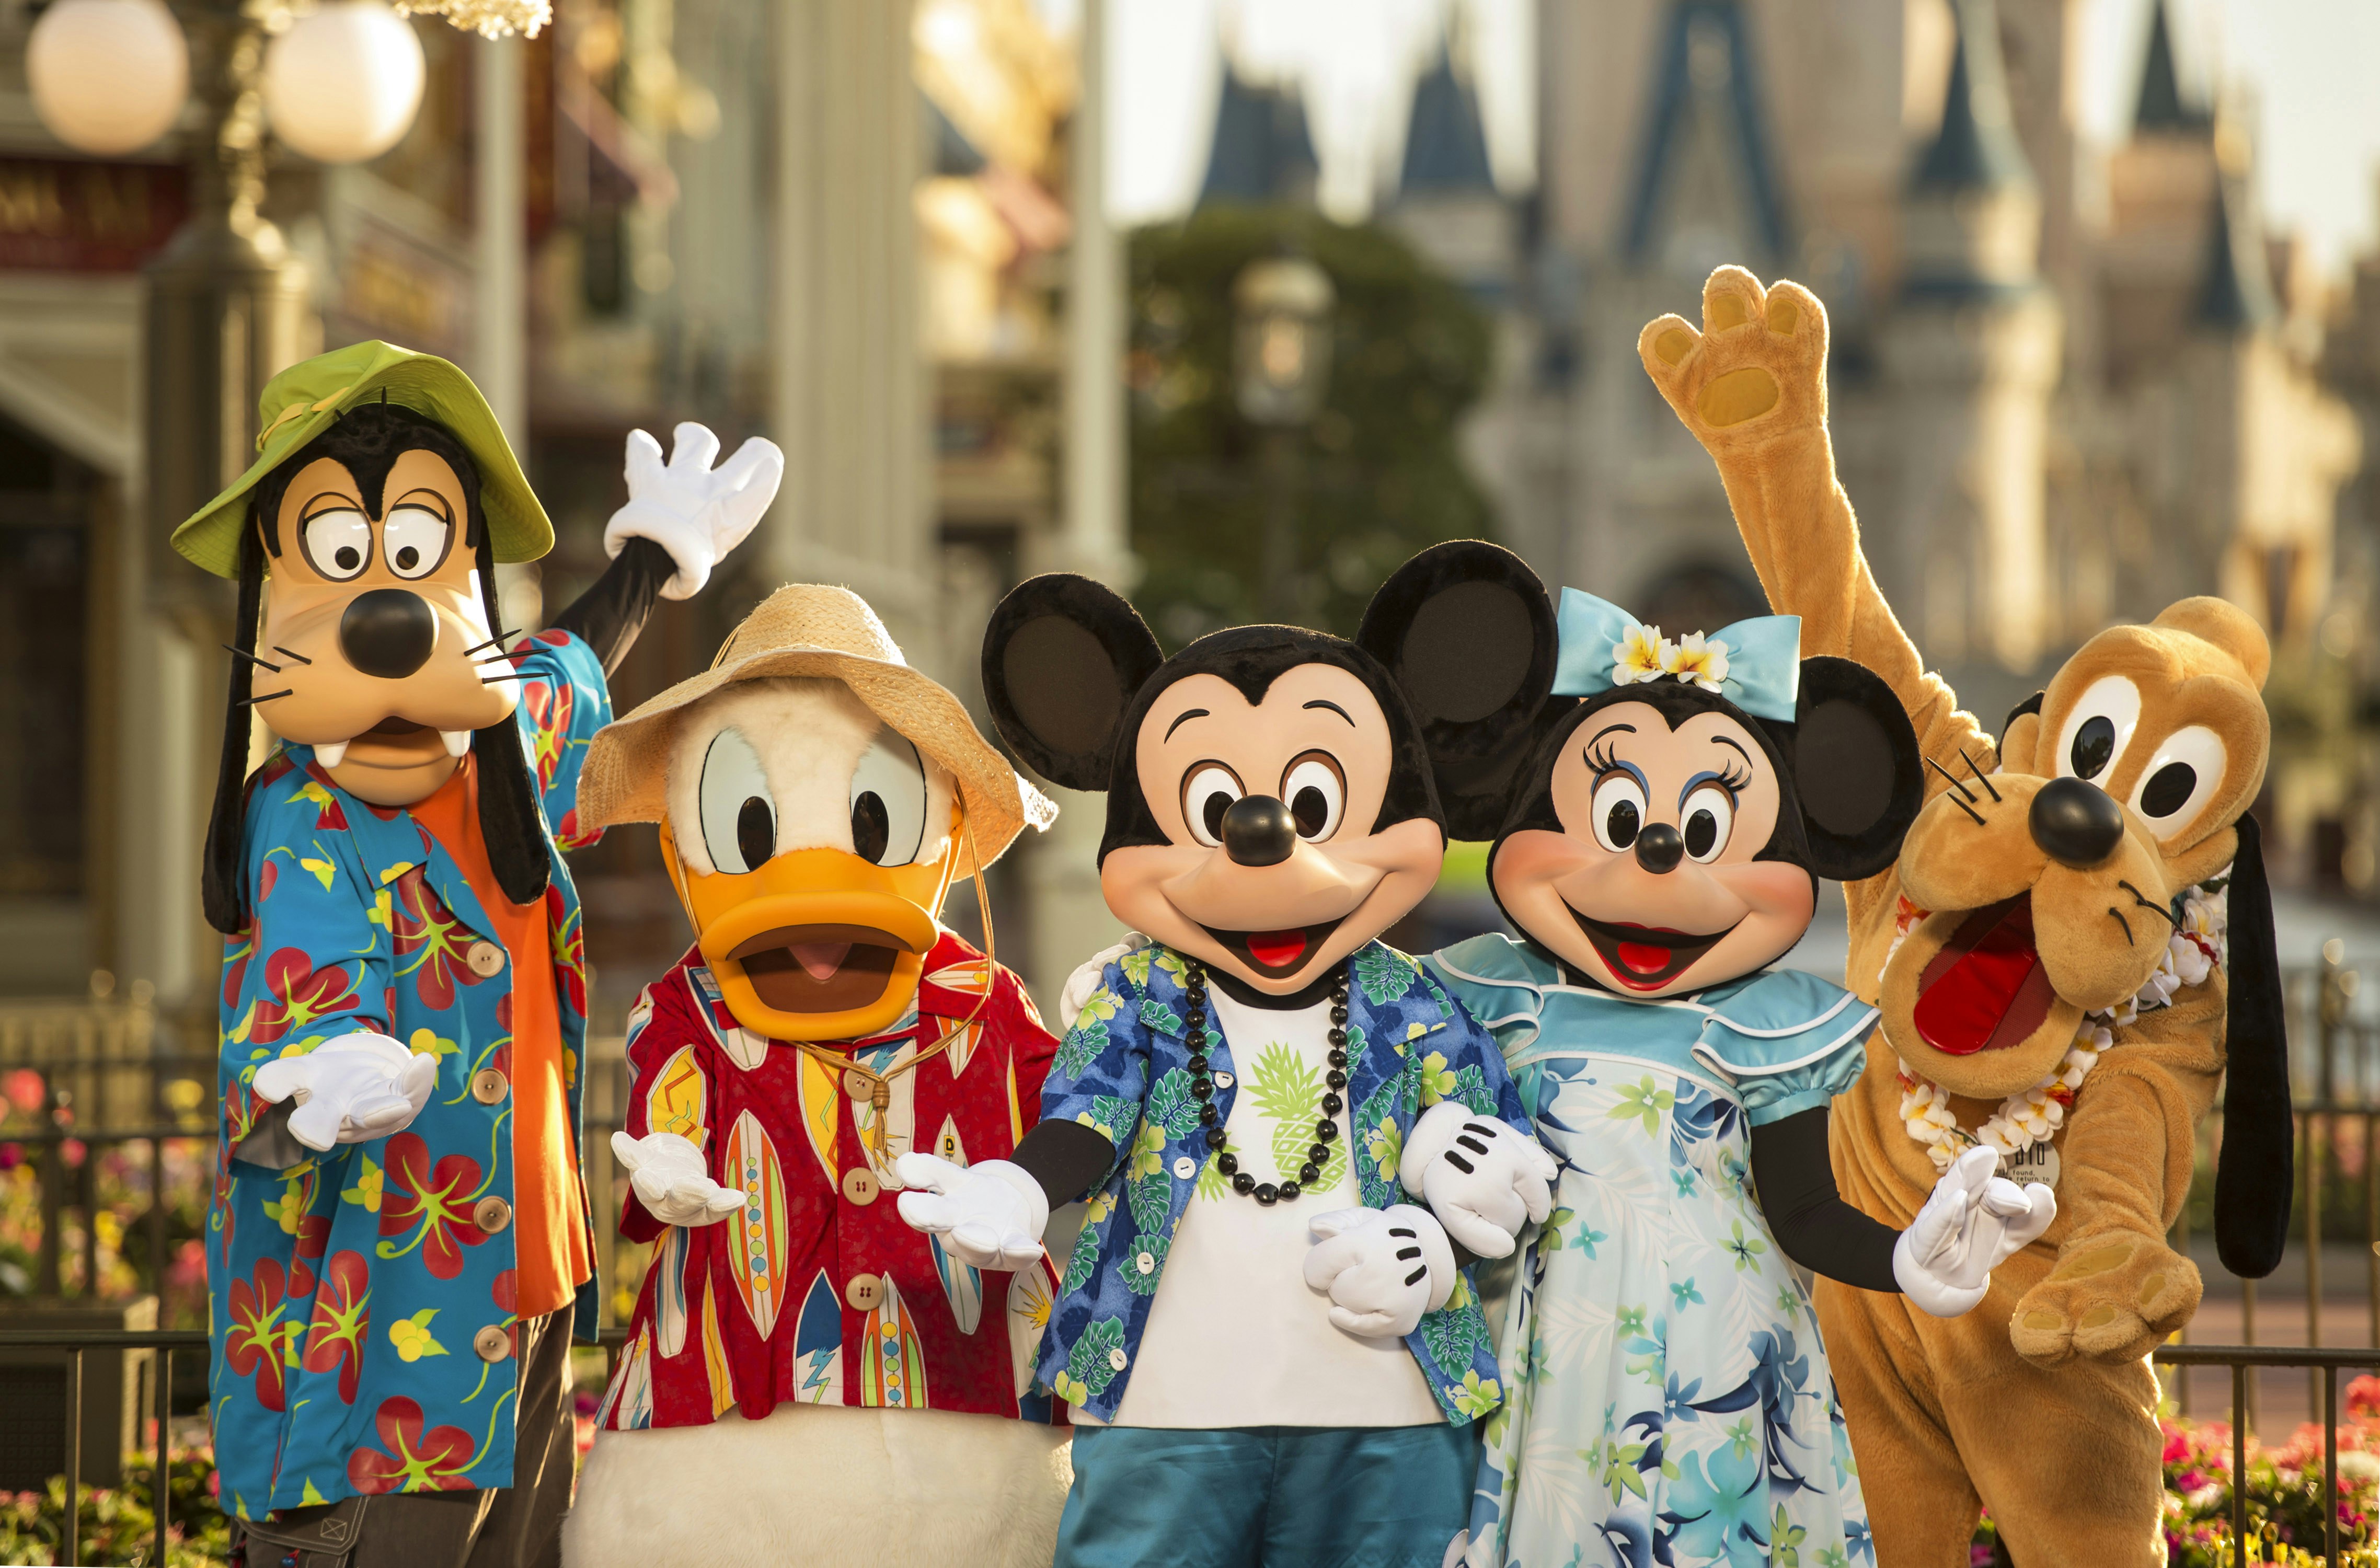 Goofy, Donald Duck, Mickey and Minnie Mouse and Pluto all pose hands outstretched in Hawaiian print clothing